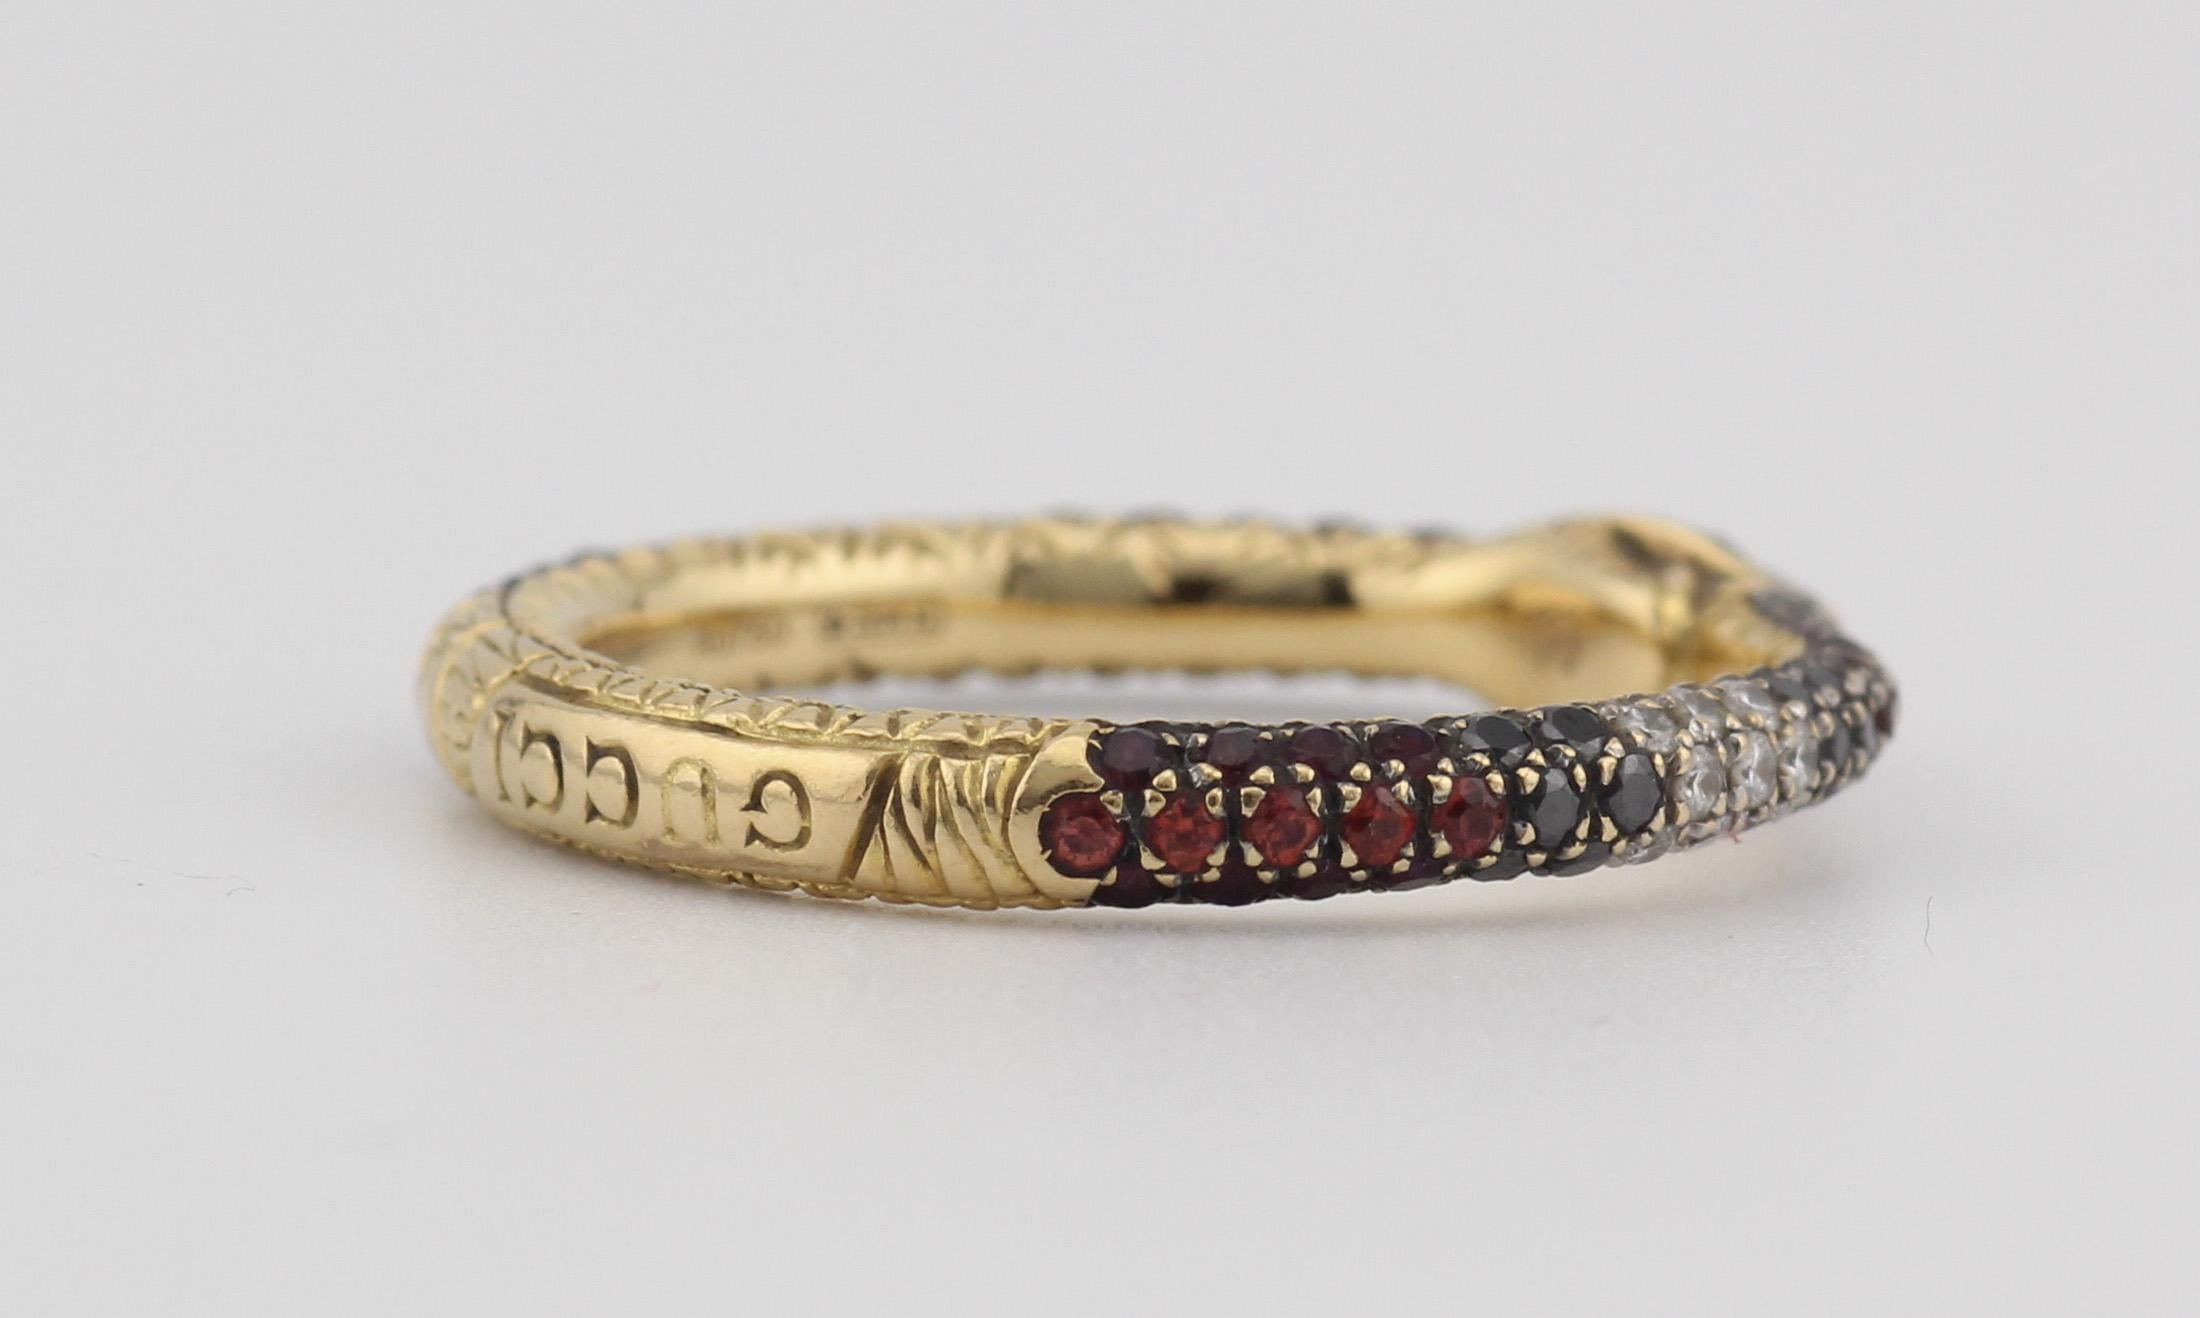 Gucci Ouroboros Gemstone 18K Yellow Gold Kingsnake Band Ring Size 5 In Good Condition For Sale In Bellmore, NY